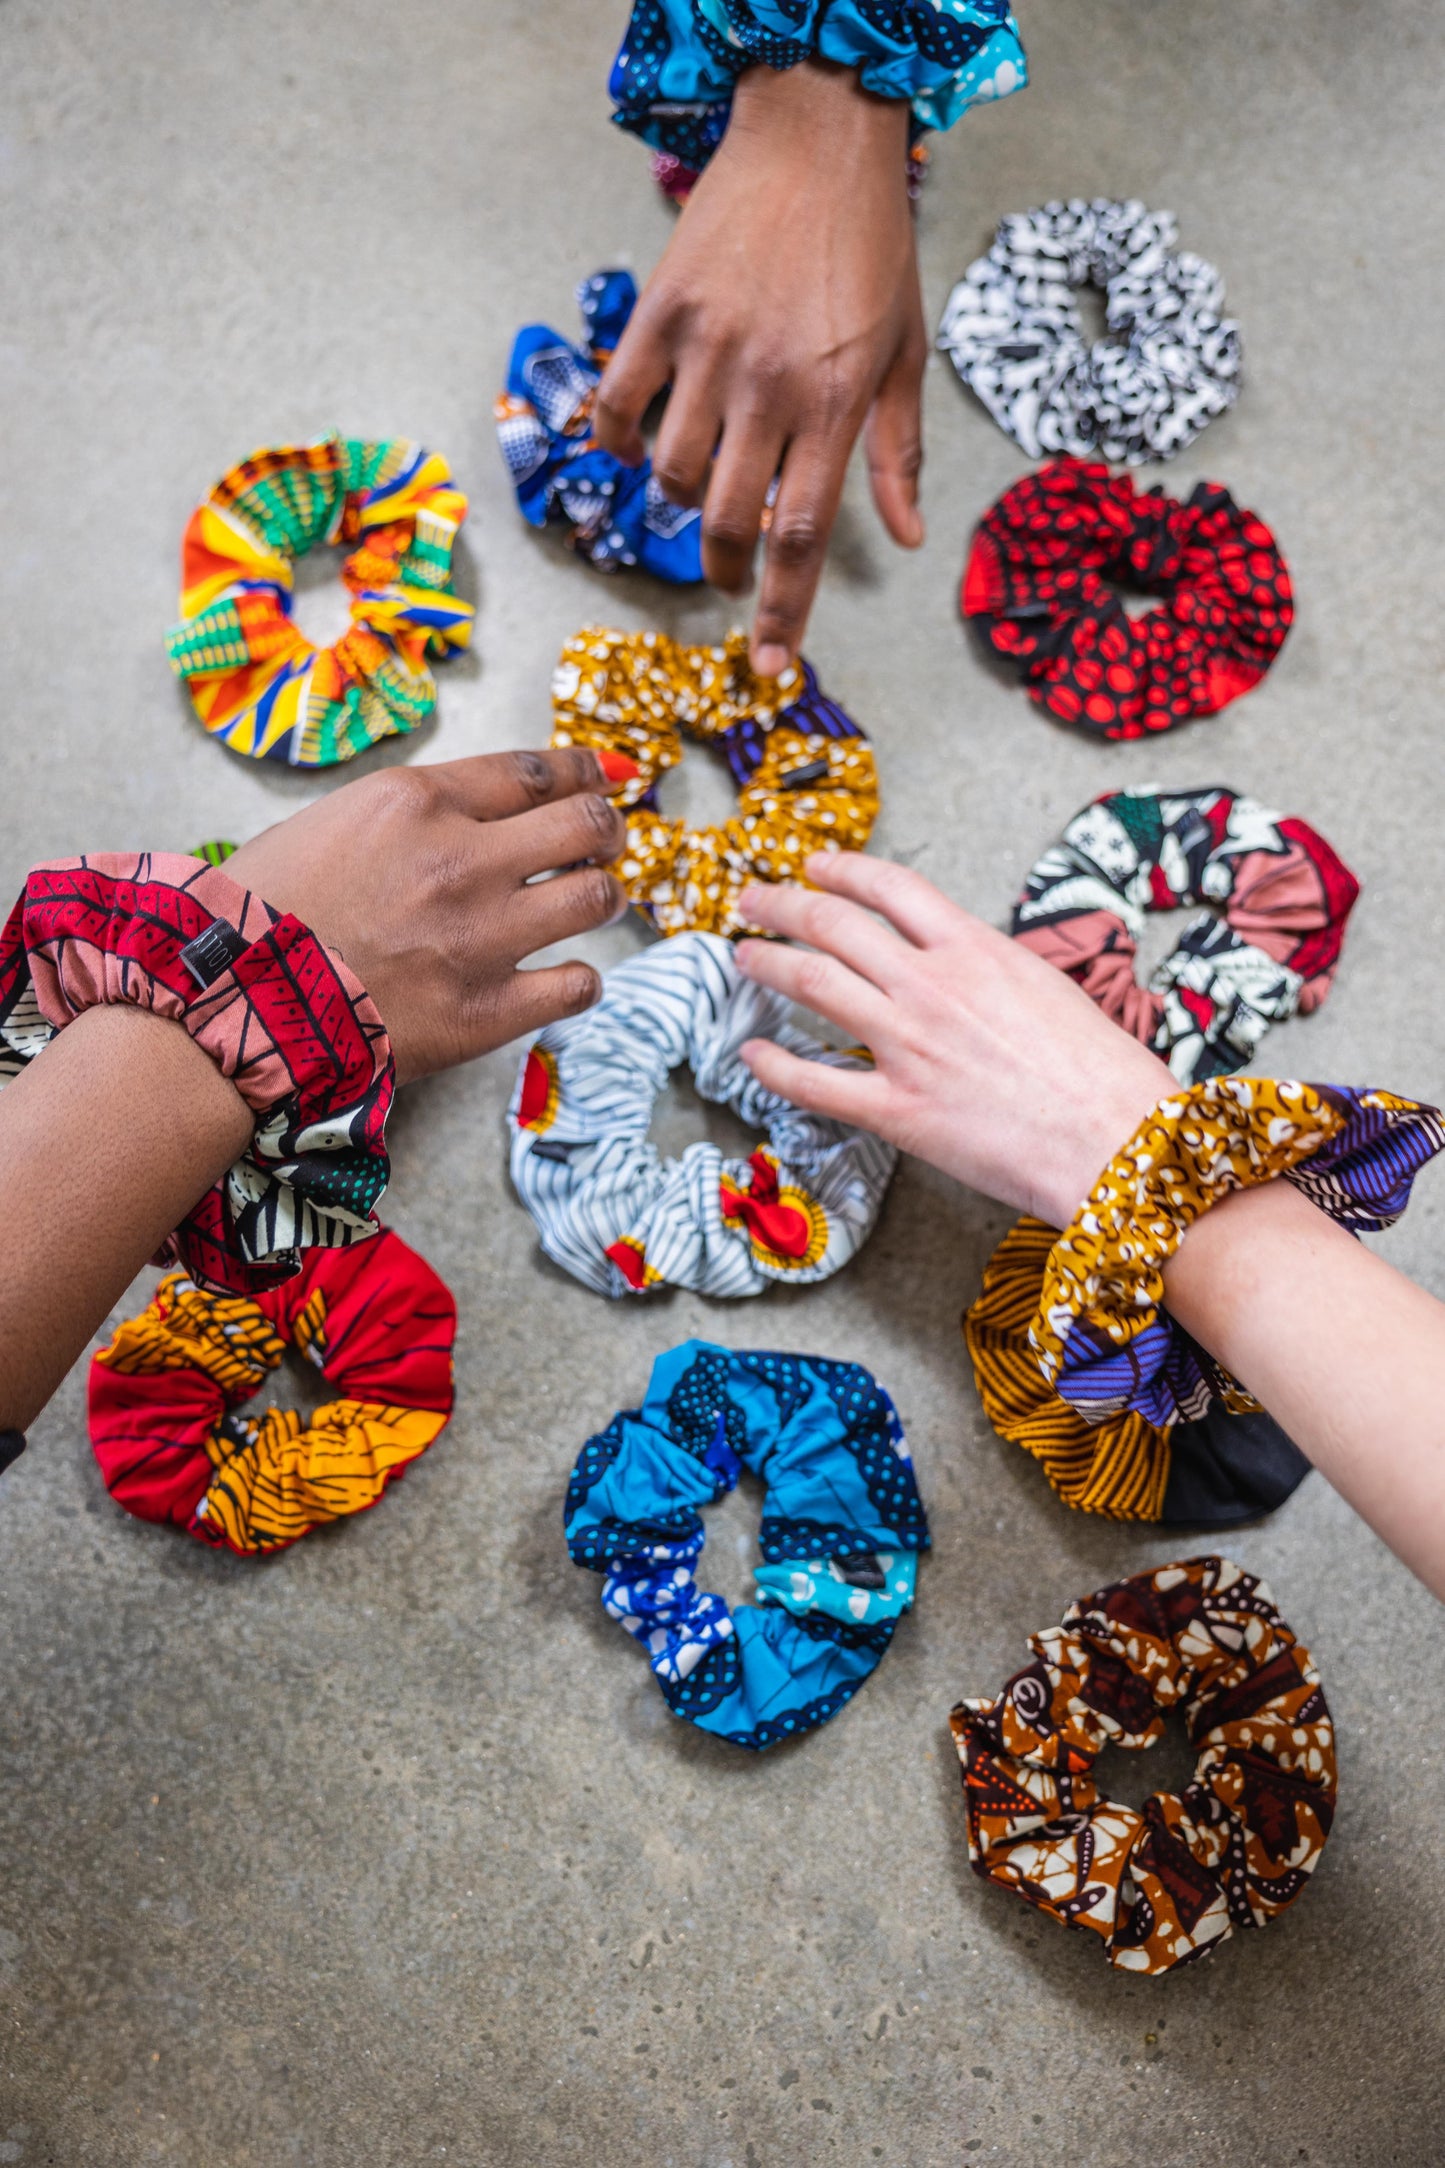 white and black hands reaching out to select a gold ankara scrunchie from a selection of 12 bright print options